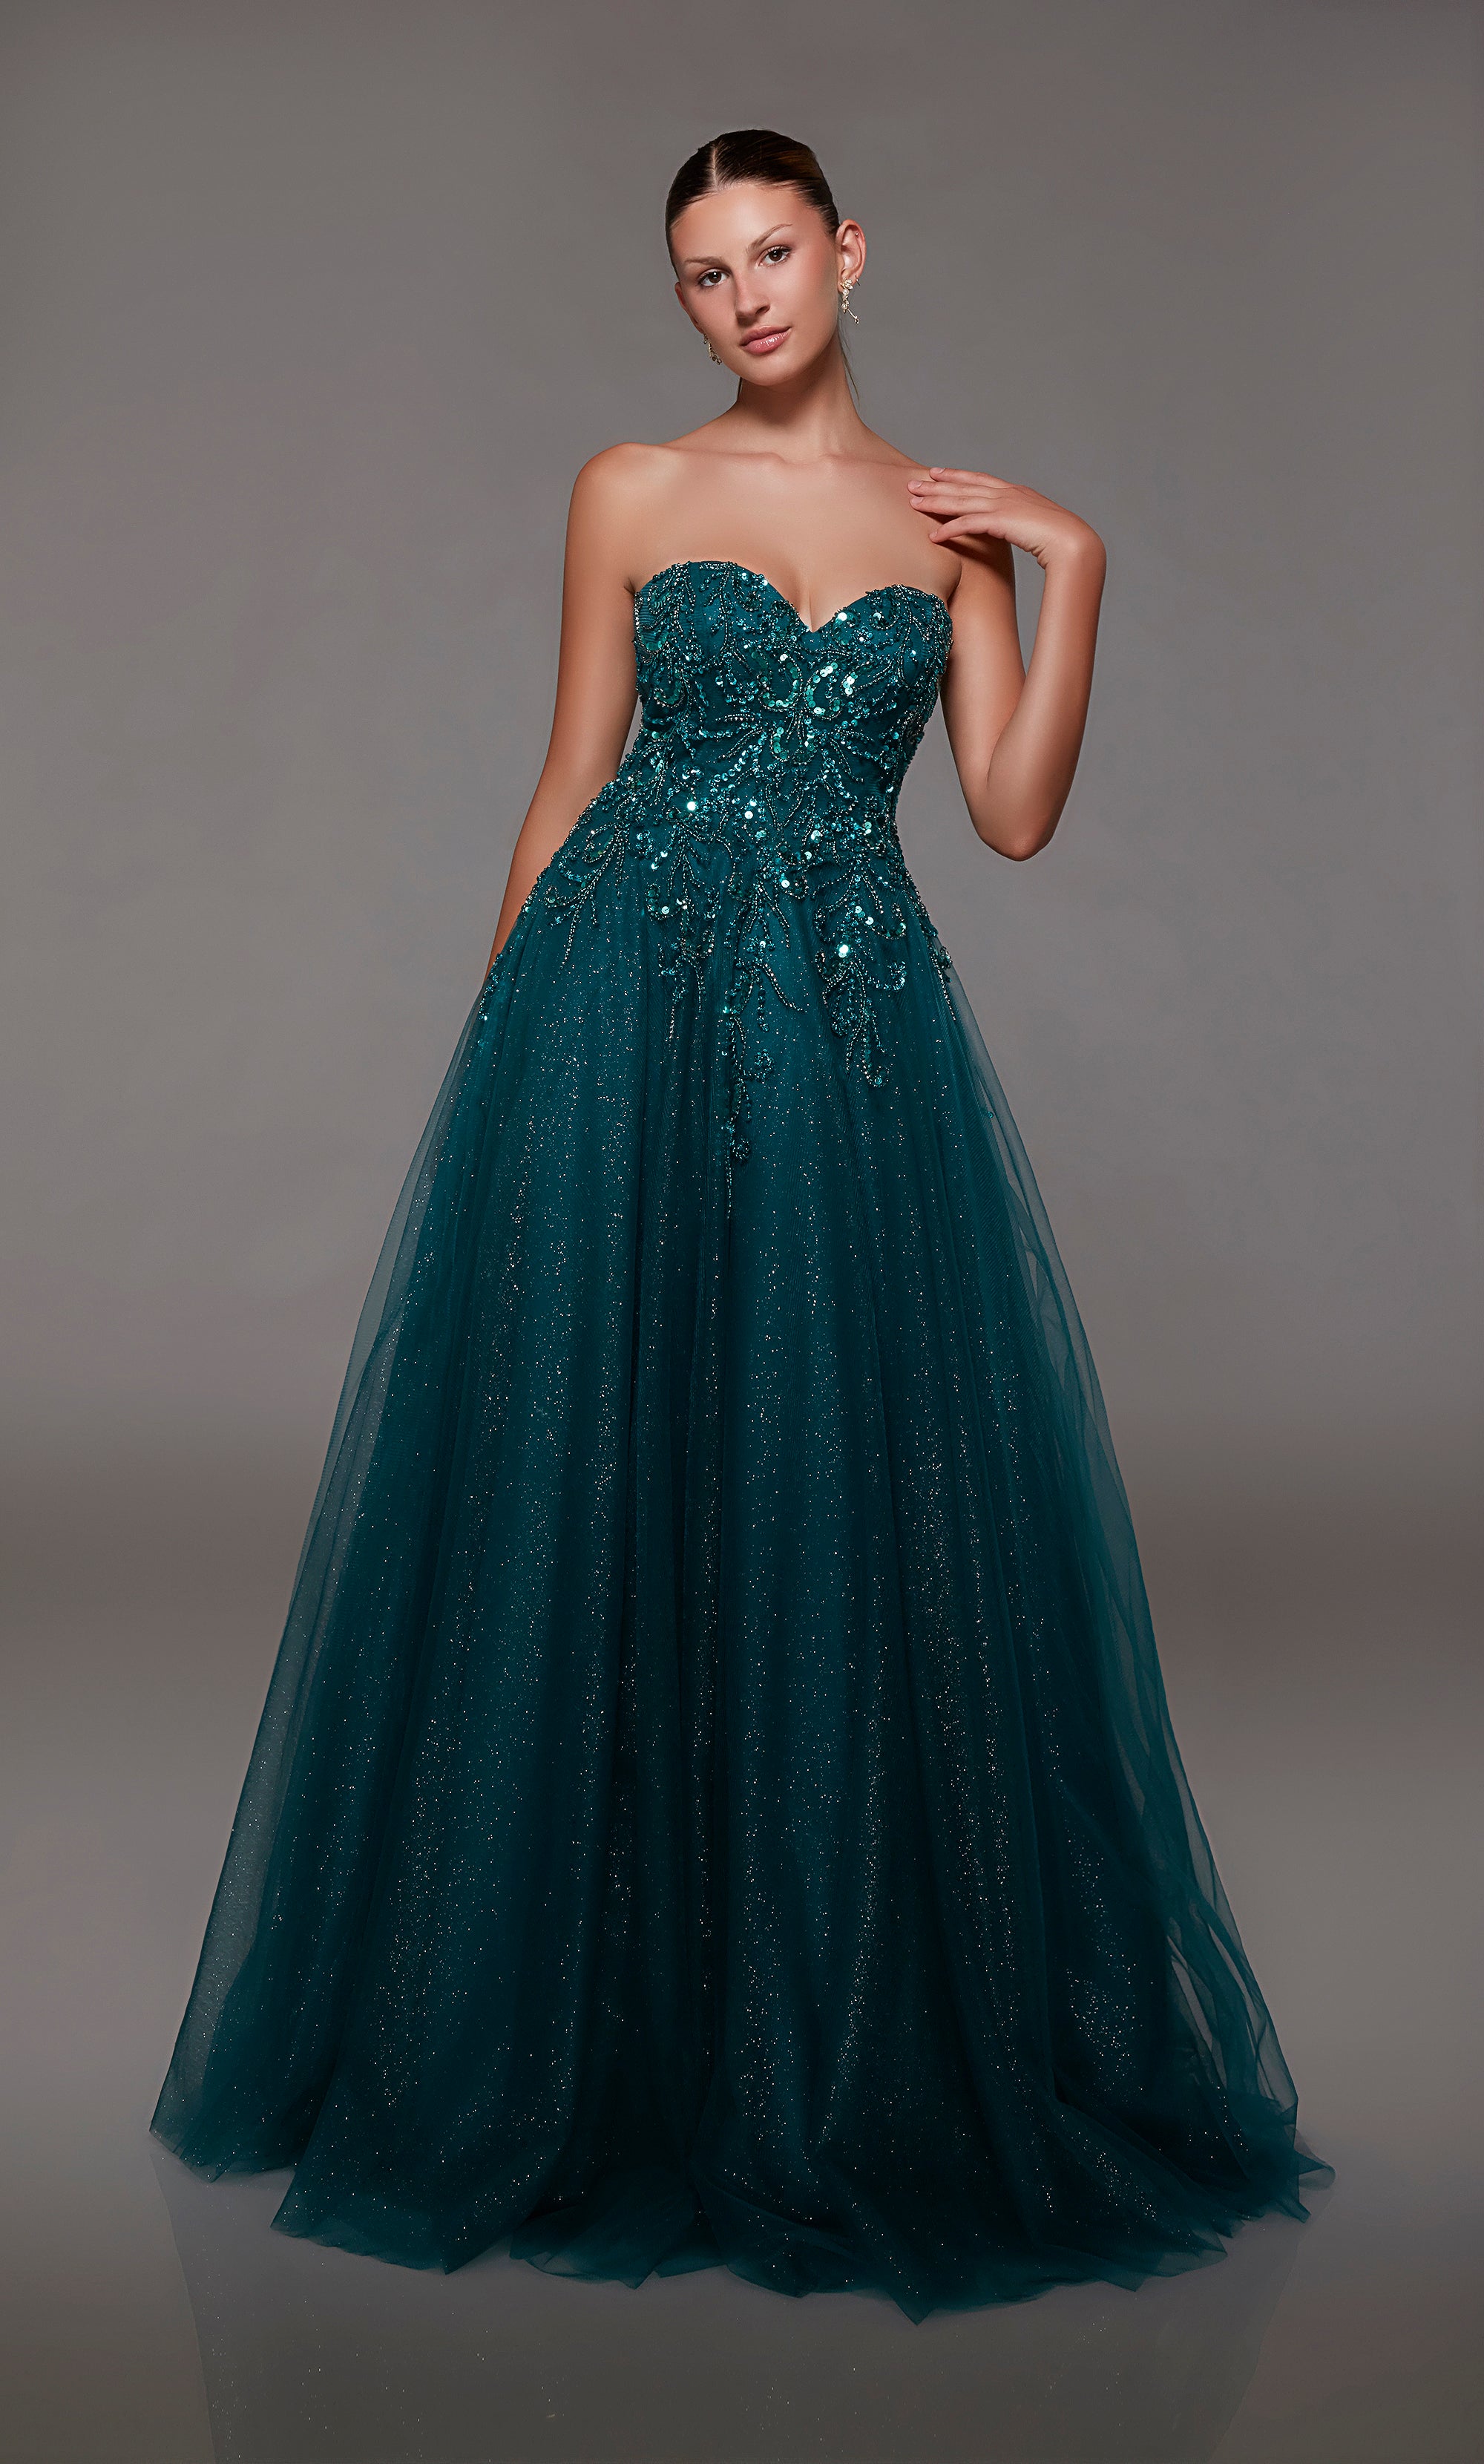 Enchanting green sweetheart ball gown with an lace-up back, sequined lace appliques on the bodice, and glitter tulle fabrication for timeless elegance.